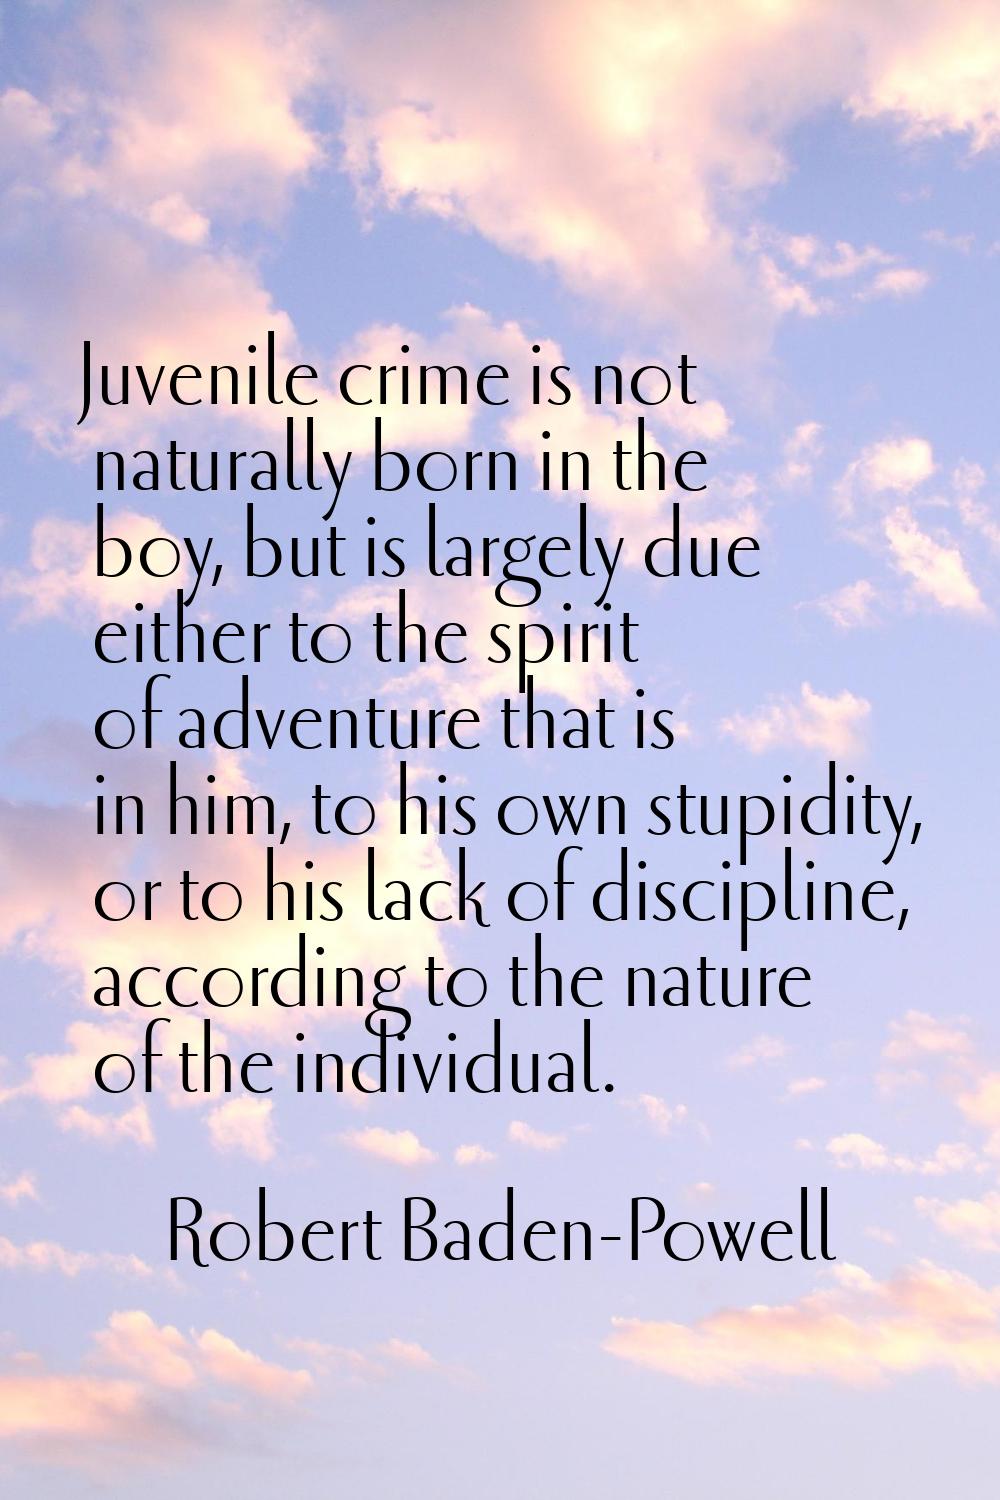 Juvenile crime is not naturally born in the boy, but is largely due either to the spirit of adventu